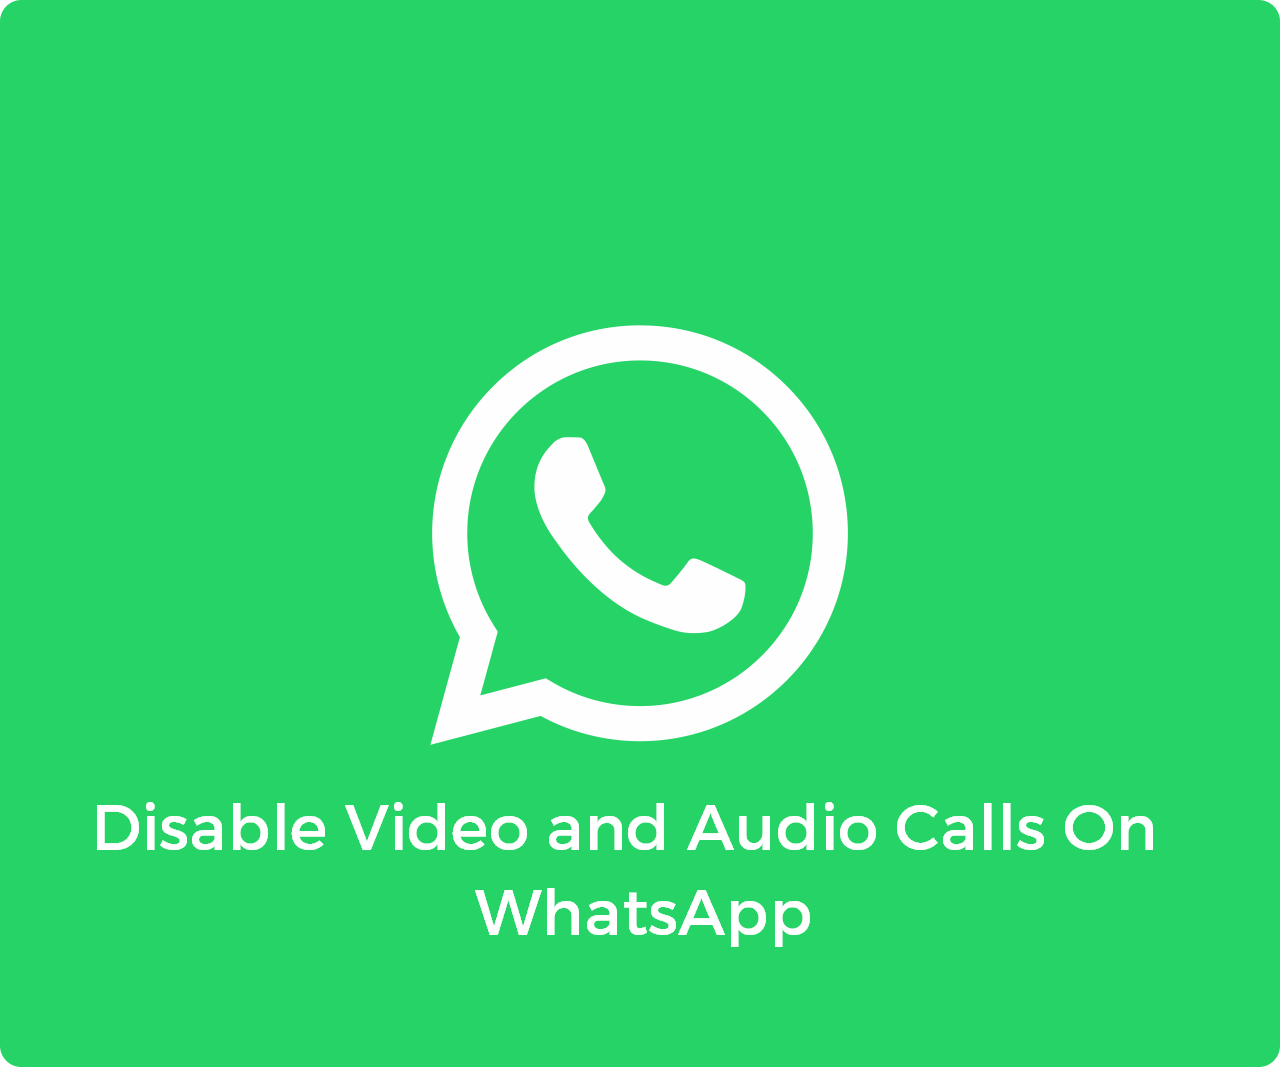 Disable Video and Audio Calls On WhatsApp